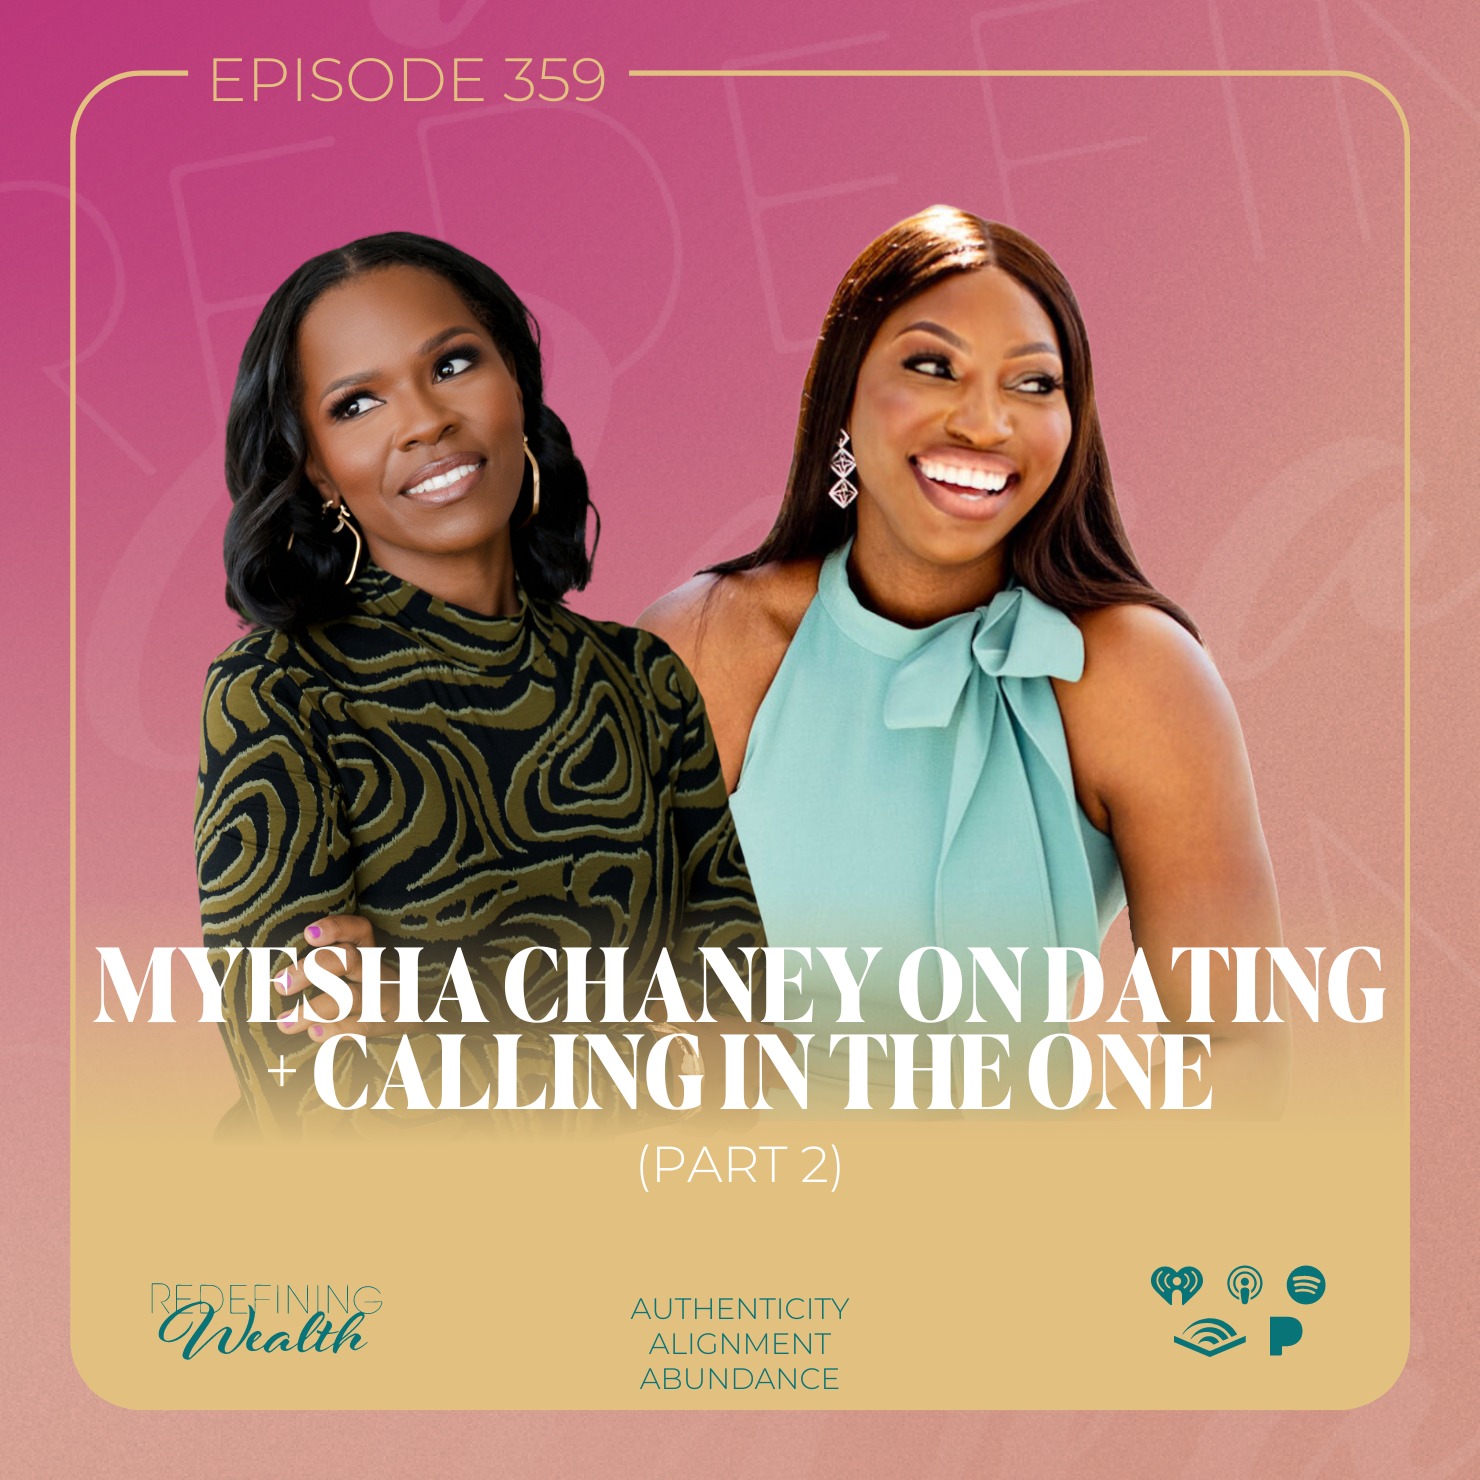 Myesha Chaney on Dating and Calling in the One